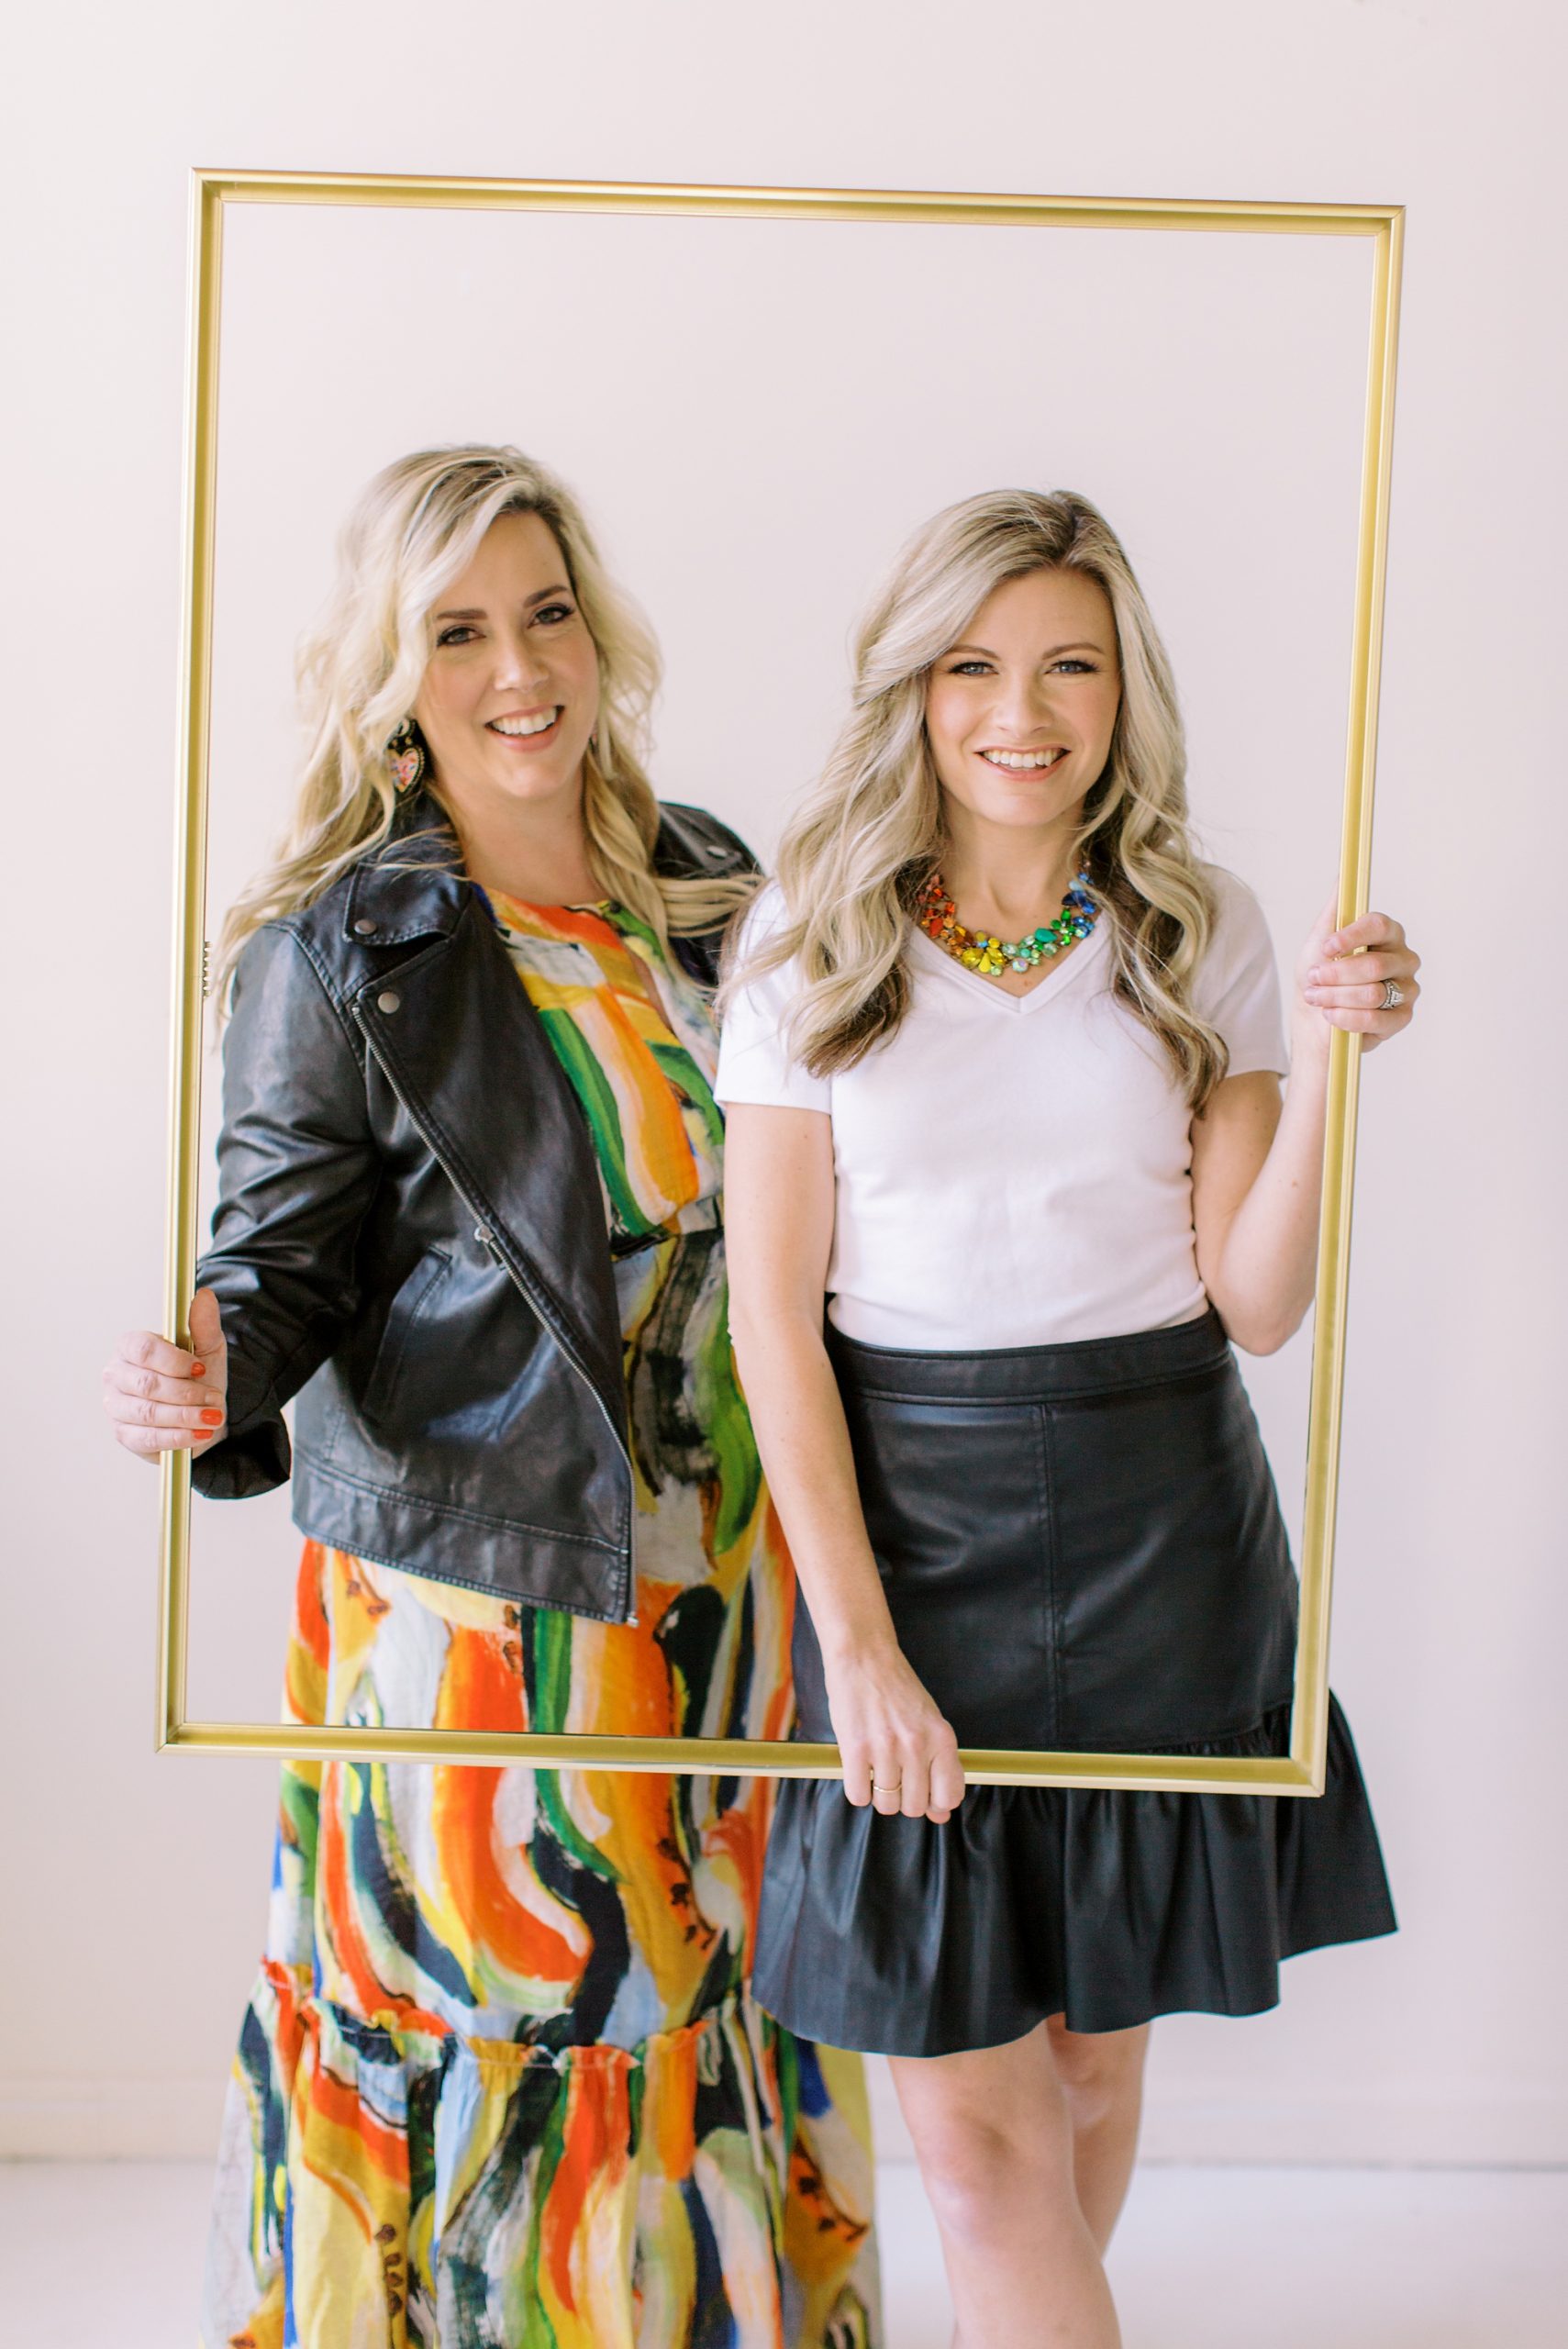 Charlotte NC wedding planners at McLean Events hold gold frame in front of themselves